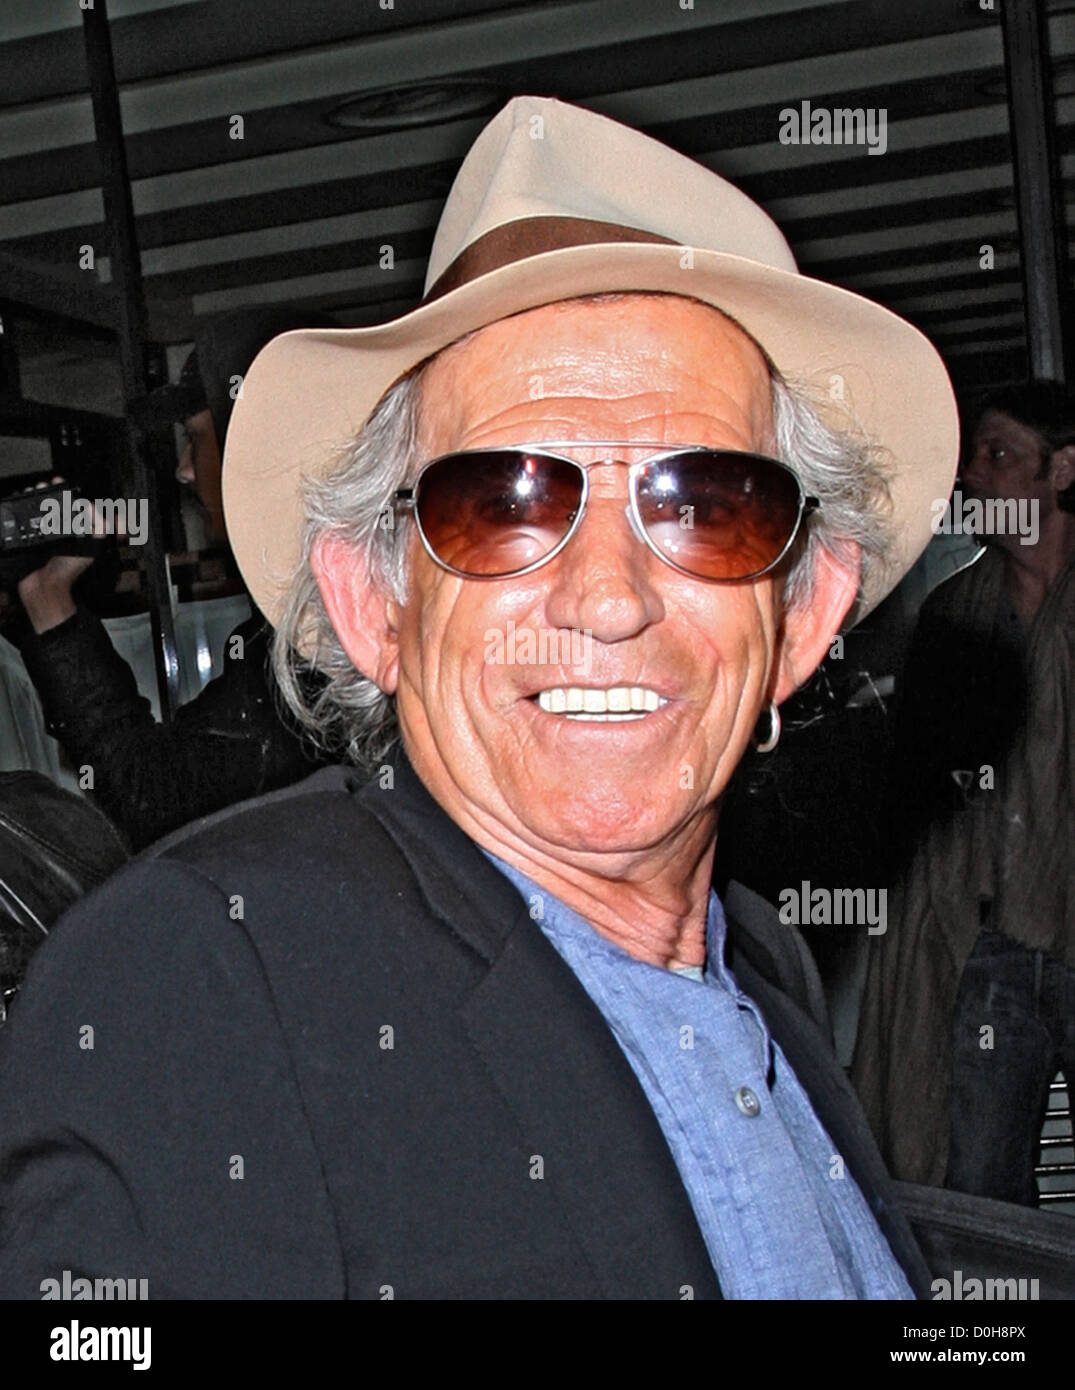 Keith Richards leaves C London restaurant wearing a fedora hats and ...